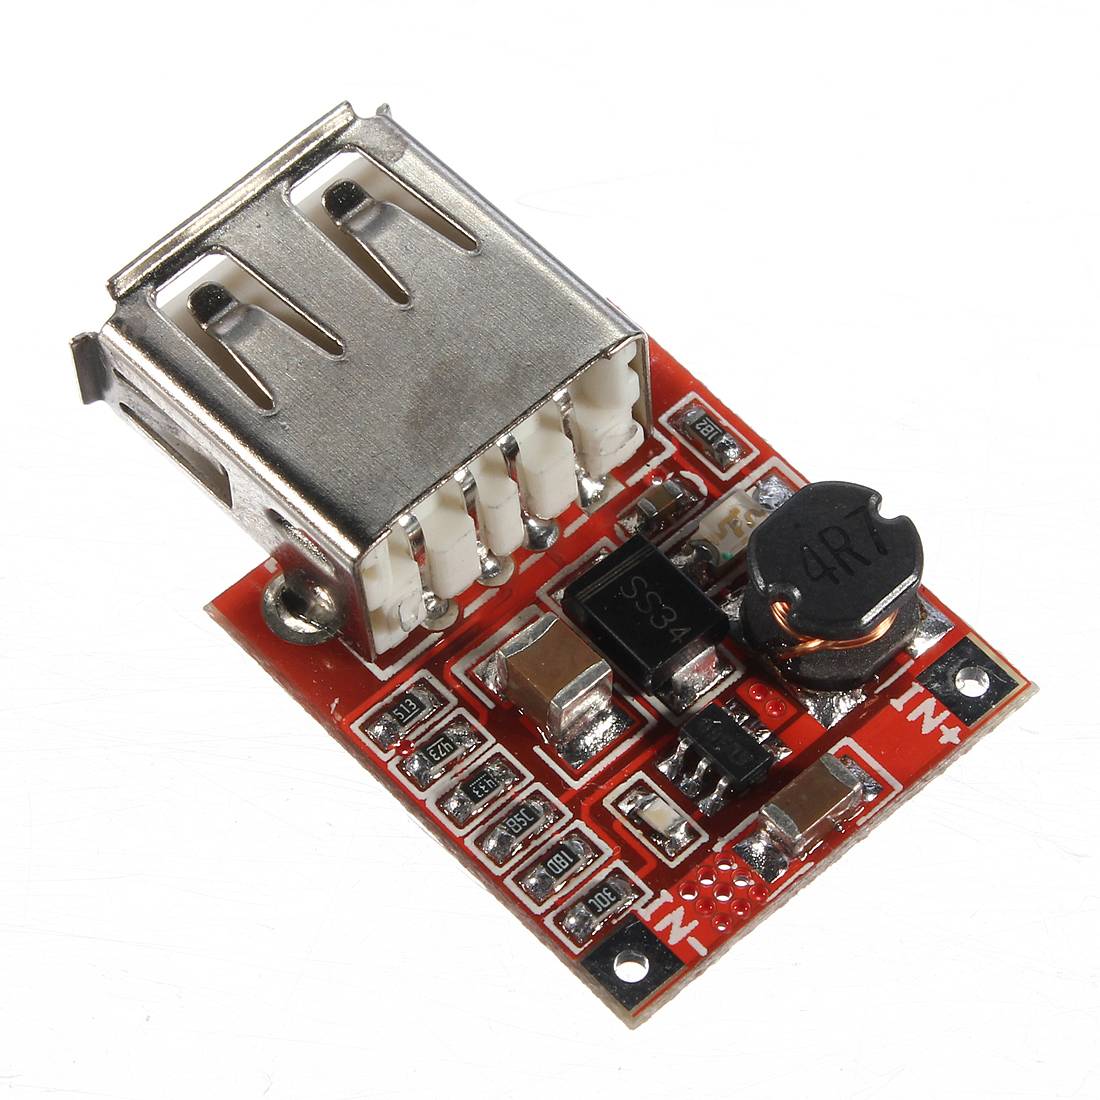 10Pcs-3V-To-5V-1A-USB-Charger-DC-DC-Converter-Step-Up-Boost-Module-966042